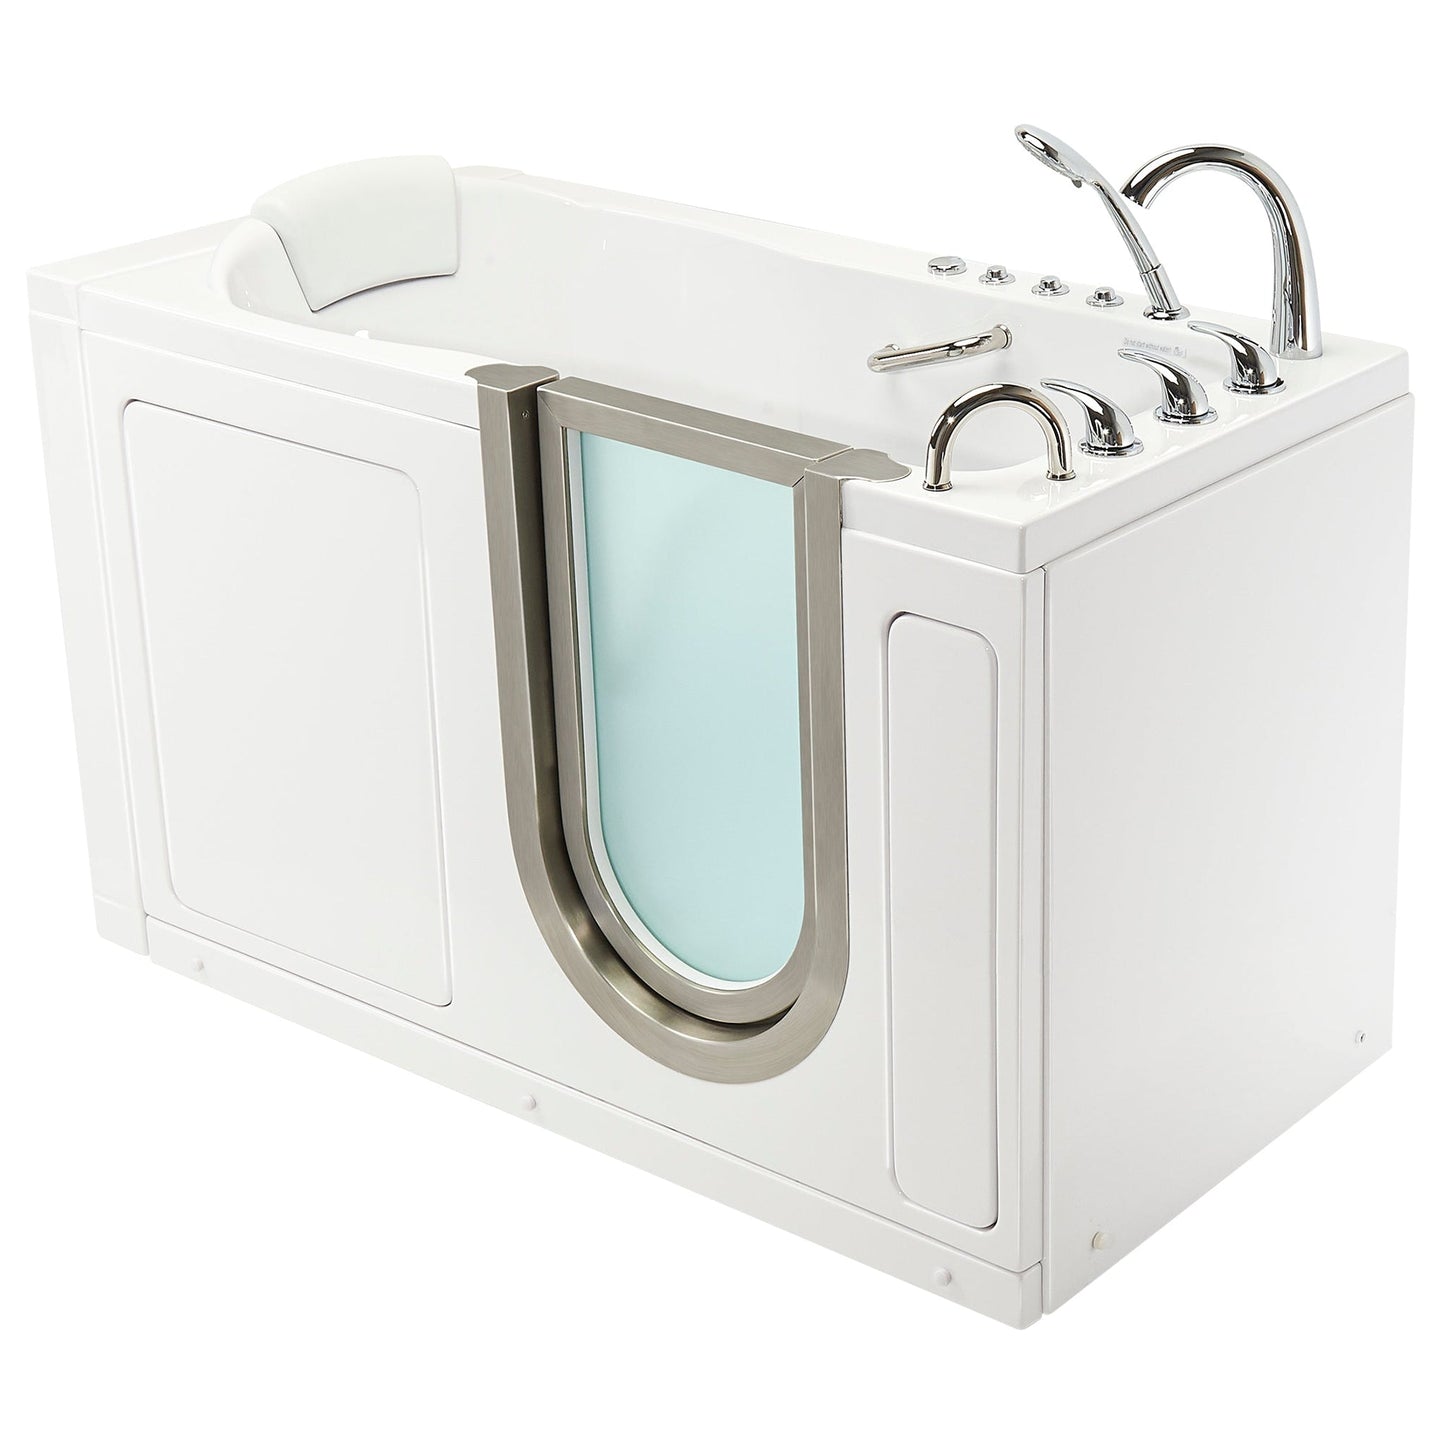 Ella's Bubbles Deluxe 30" x 55" White Acrylic Air and Hydro Massage Walk-In Bathtub With 5-Piece Fast Fill Faucet, 2" Dual Drain and Right Inward Swing Door